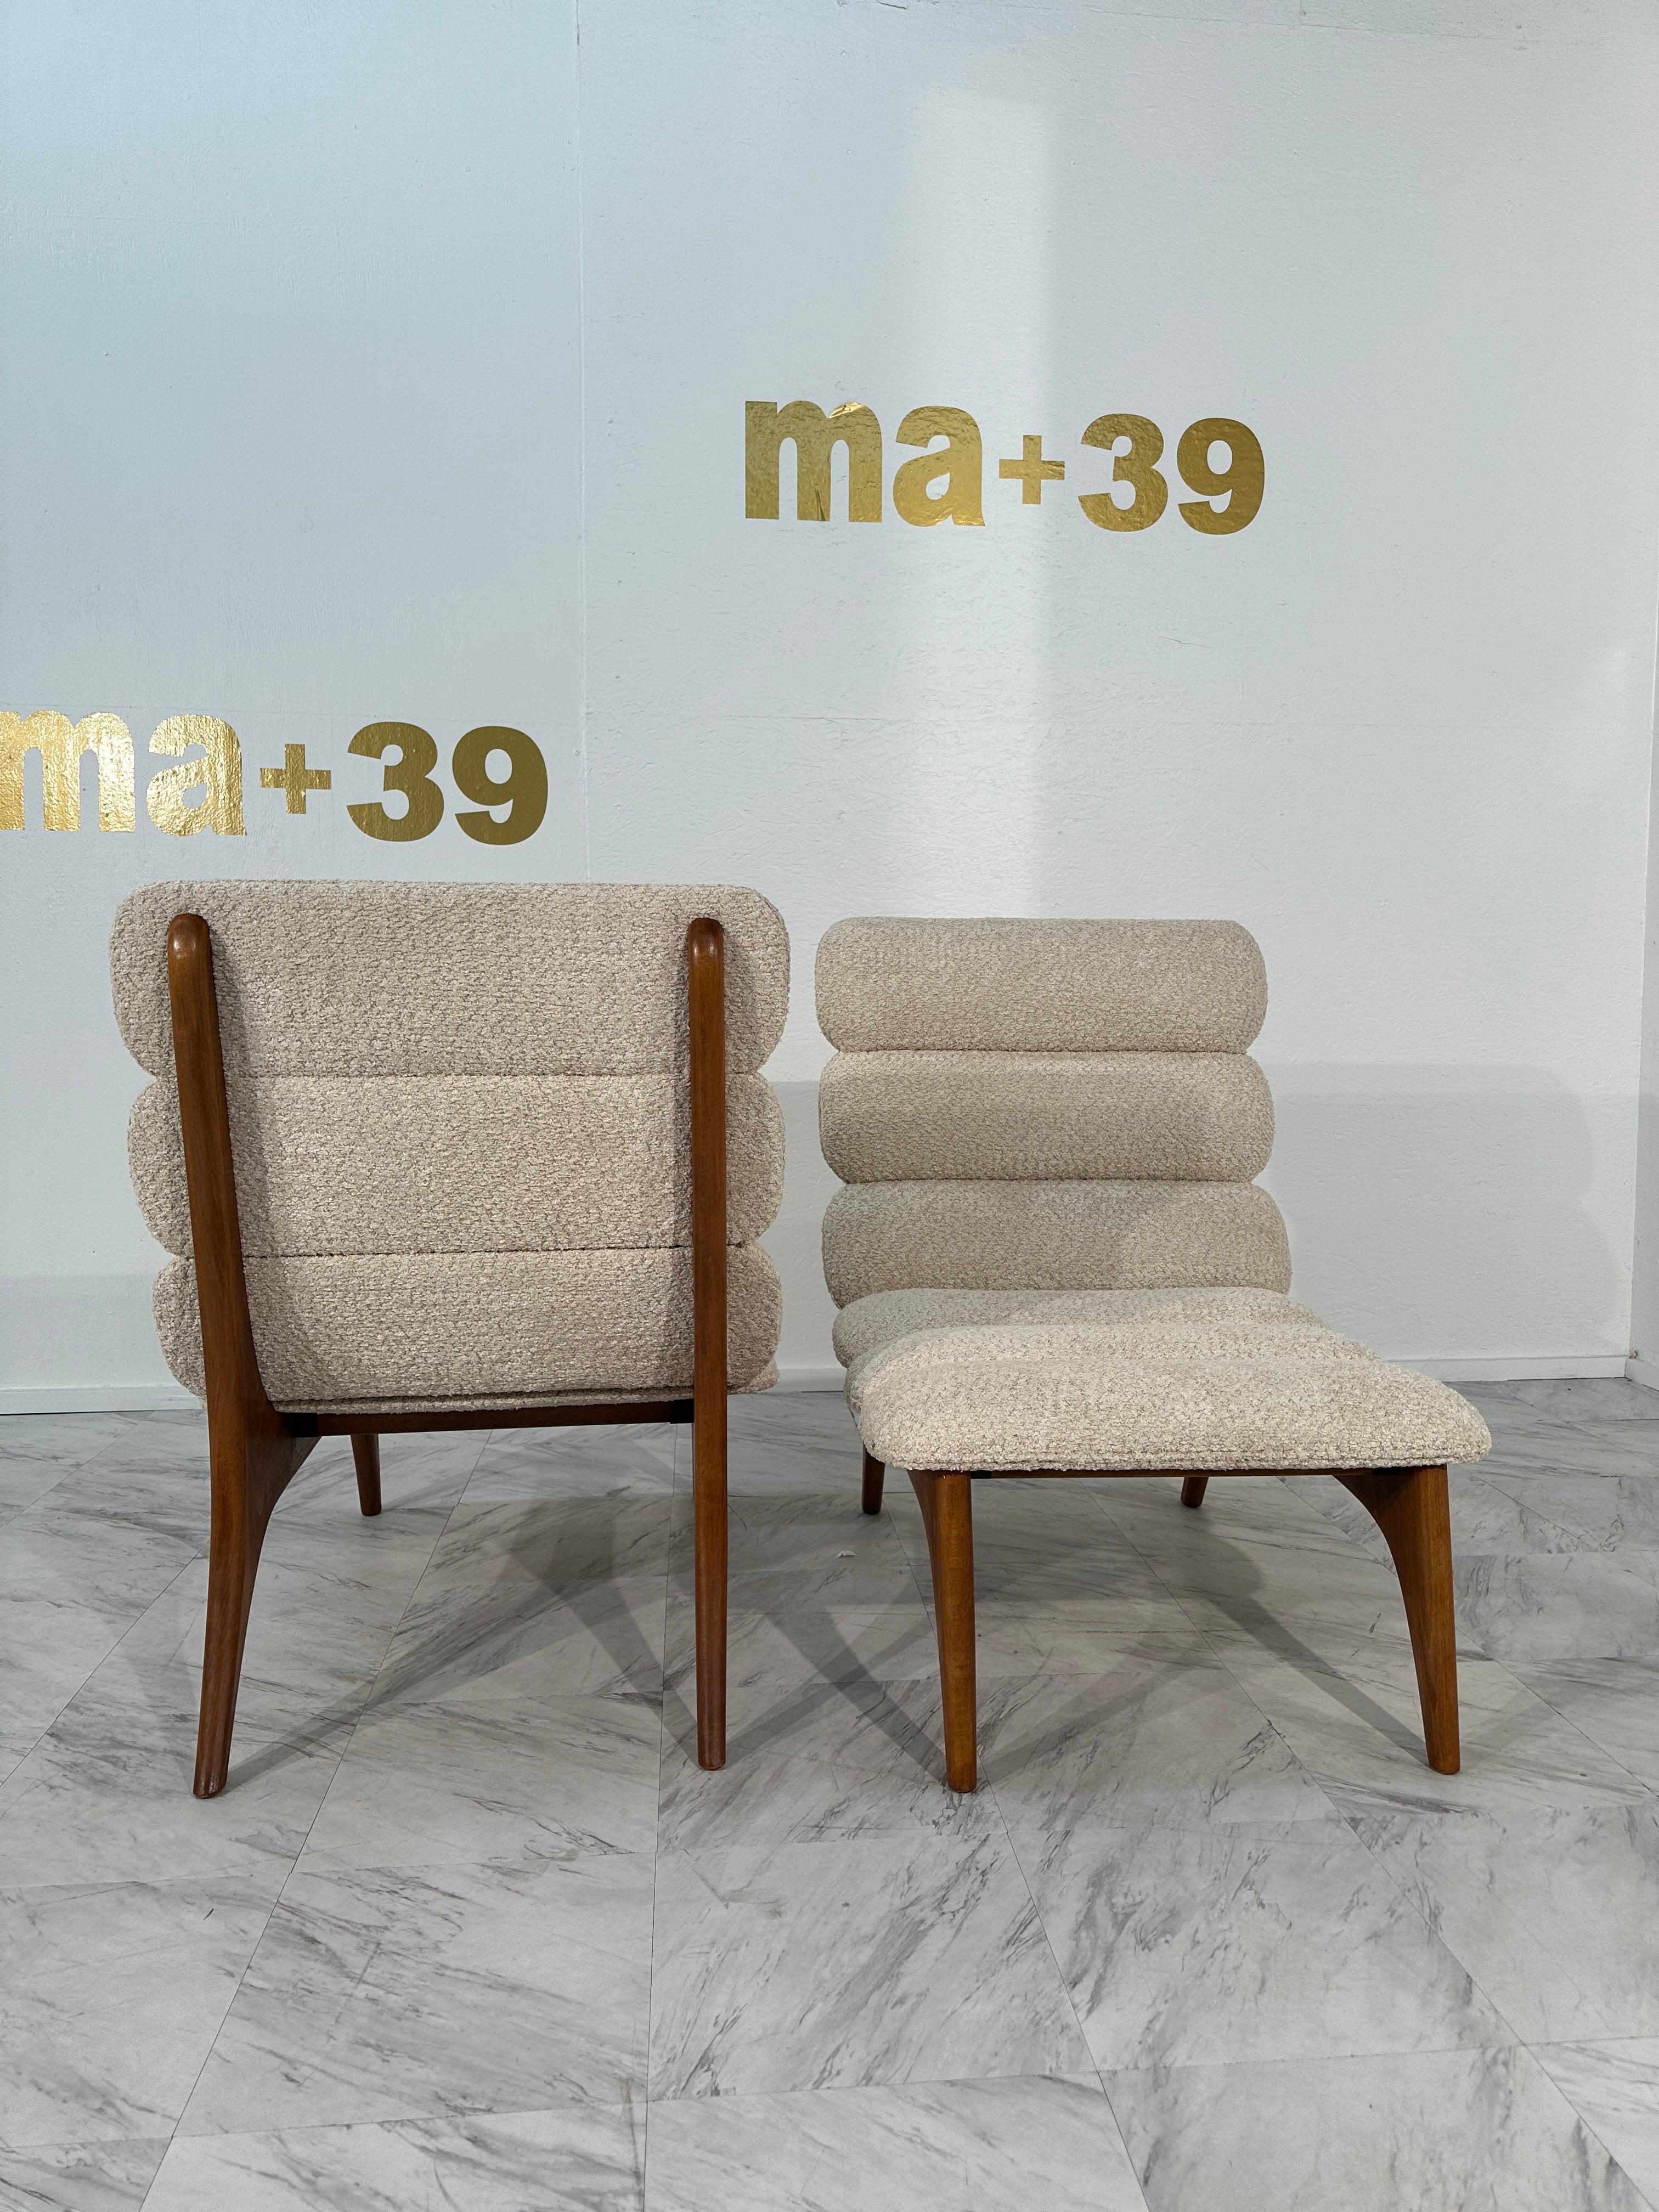 The Pair of Mid-Century Modern Danish Lounge Chairs in Boucle Fabric from the 1980s epitomizes the iconic Scandinavian design ethos of simplicity, functionality, and comfort. Crafted with precision and attention to detail, these chairs feature clean